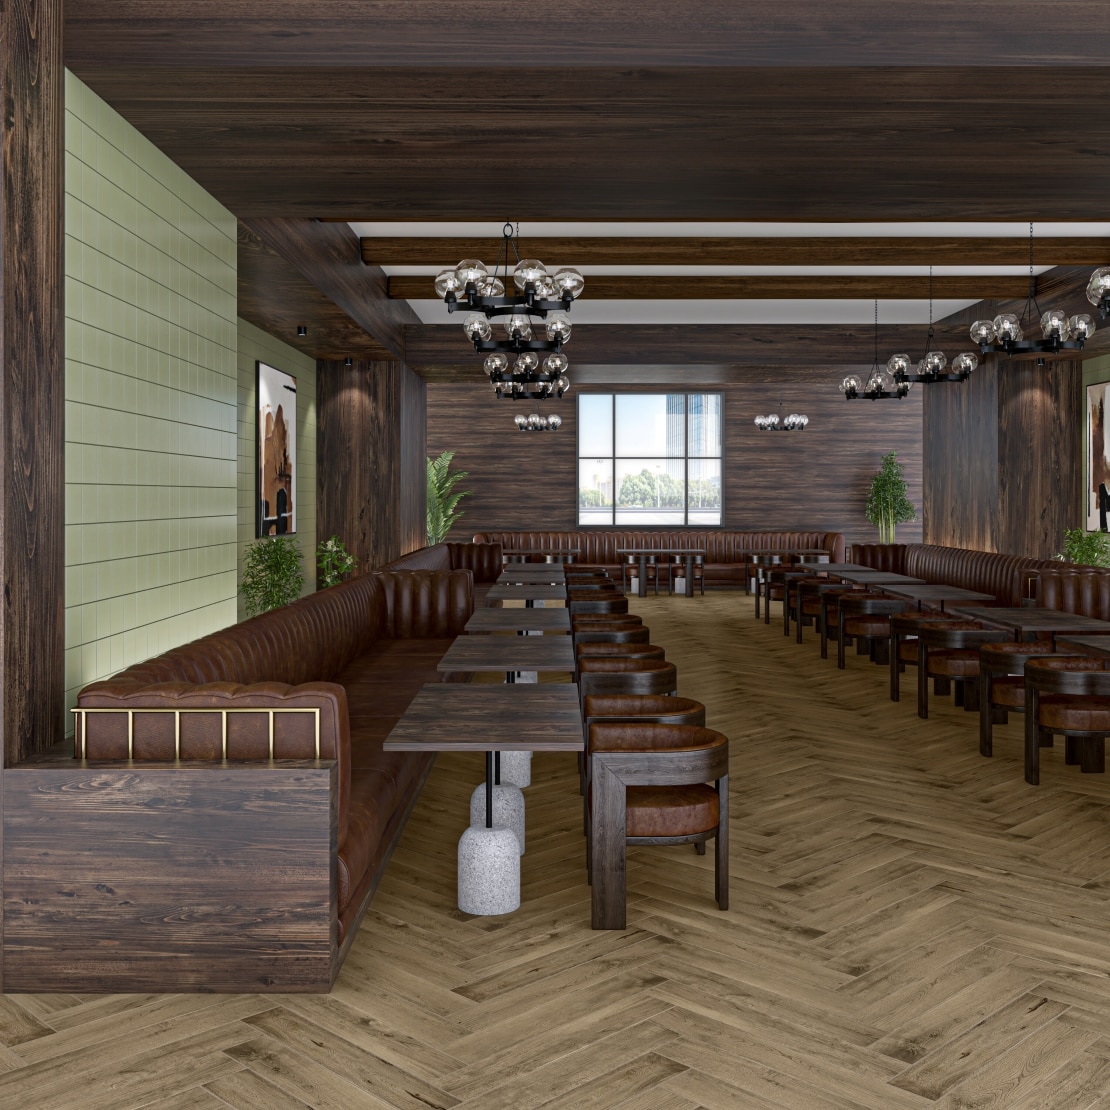 Rustic restaurant with large booth seats and herringbone wood floor.